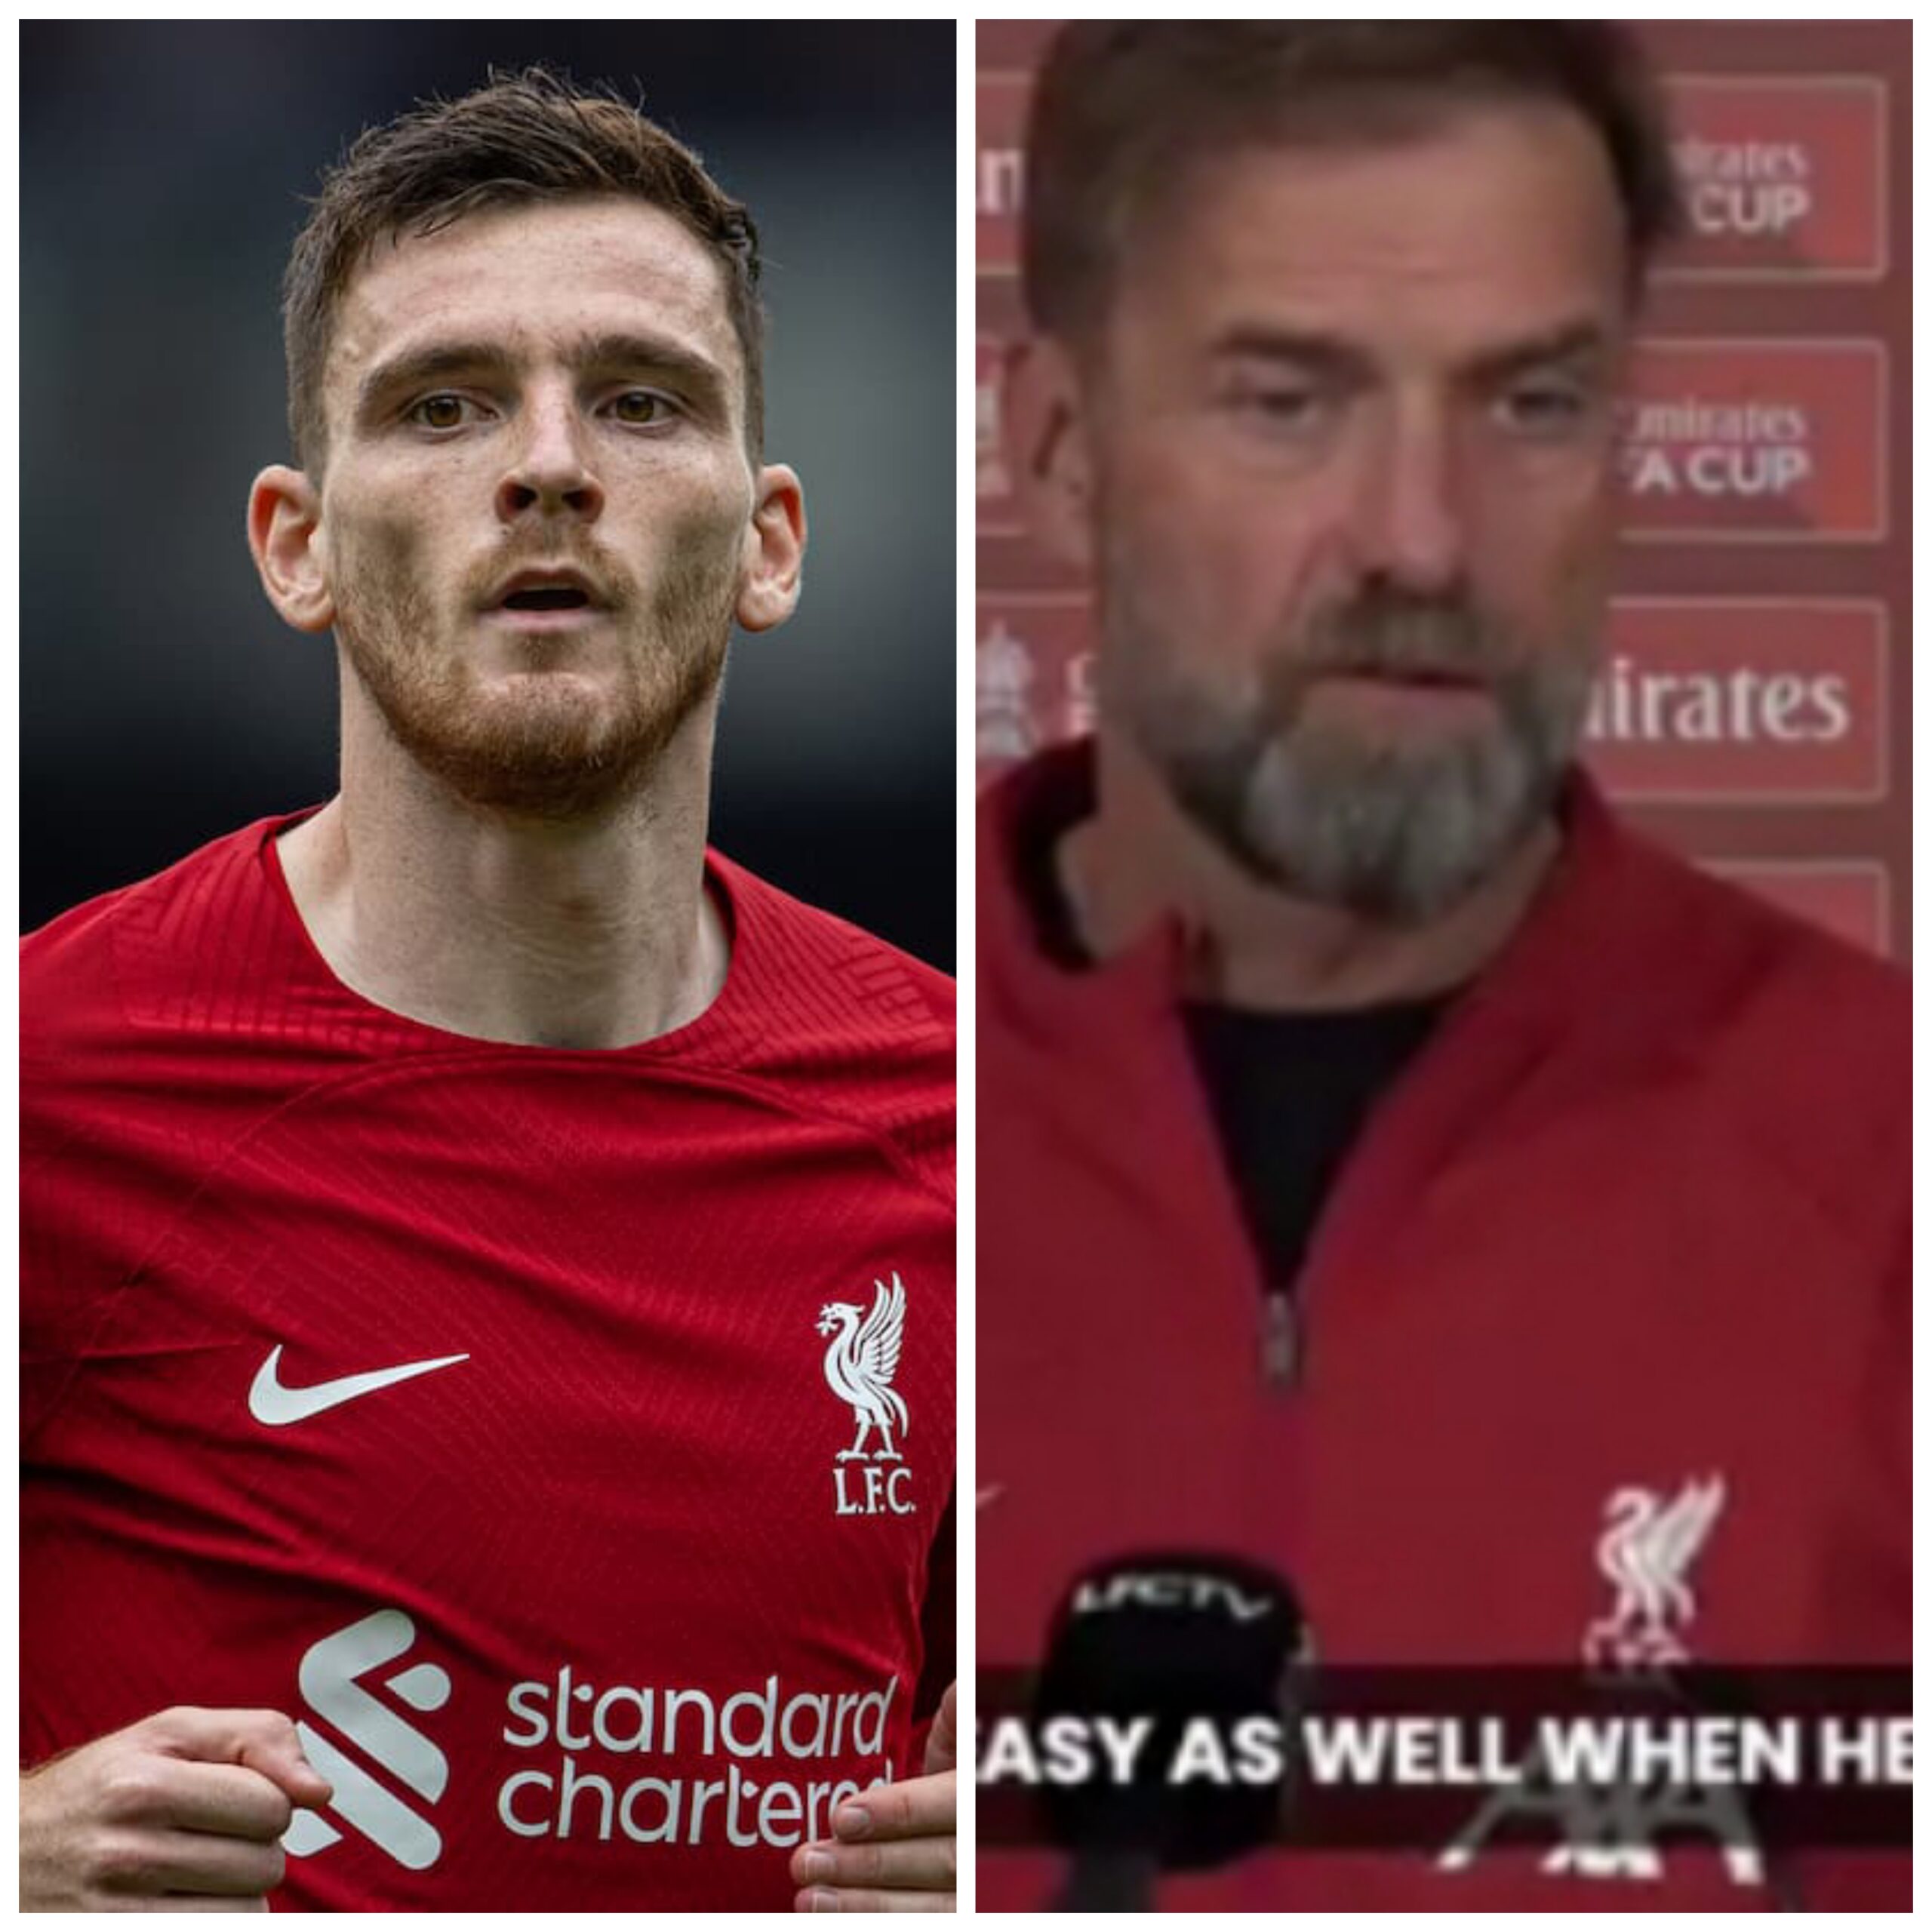 "Not True"-Jurgen Klopp reacts to Andy Robertson's blunt claim that Liverpool are getting worse 2 Sportelo